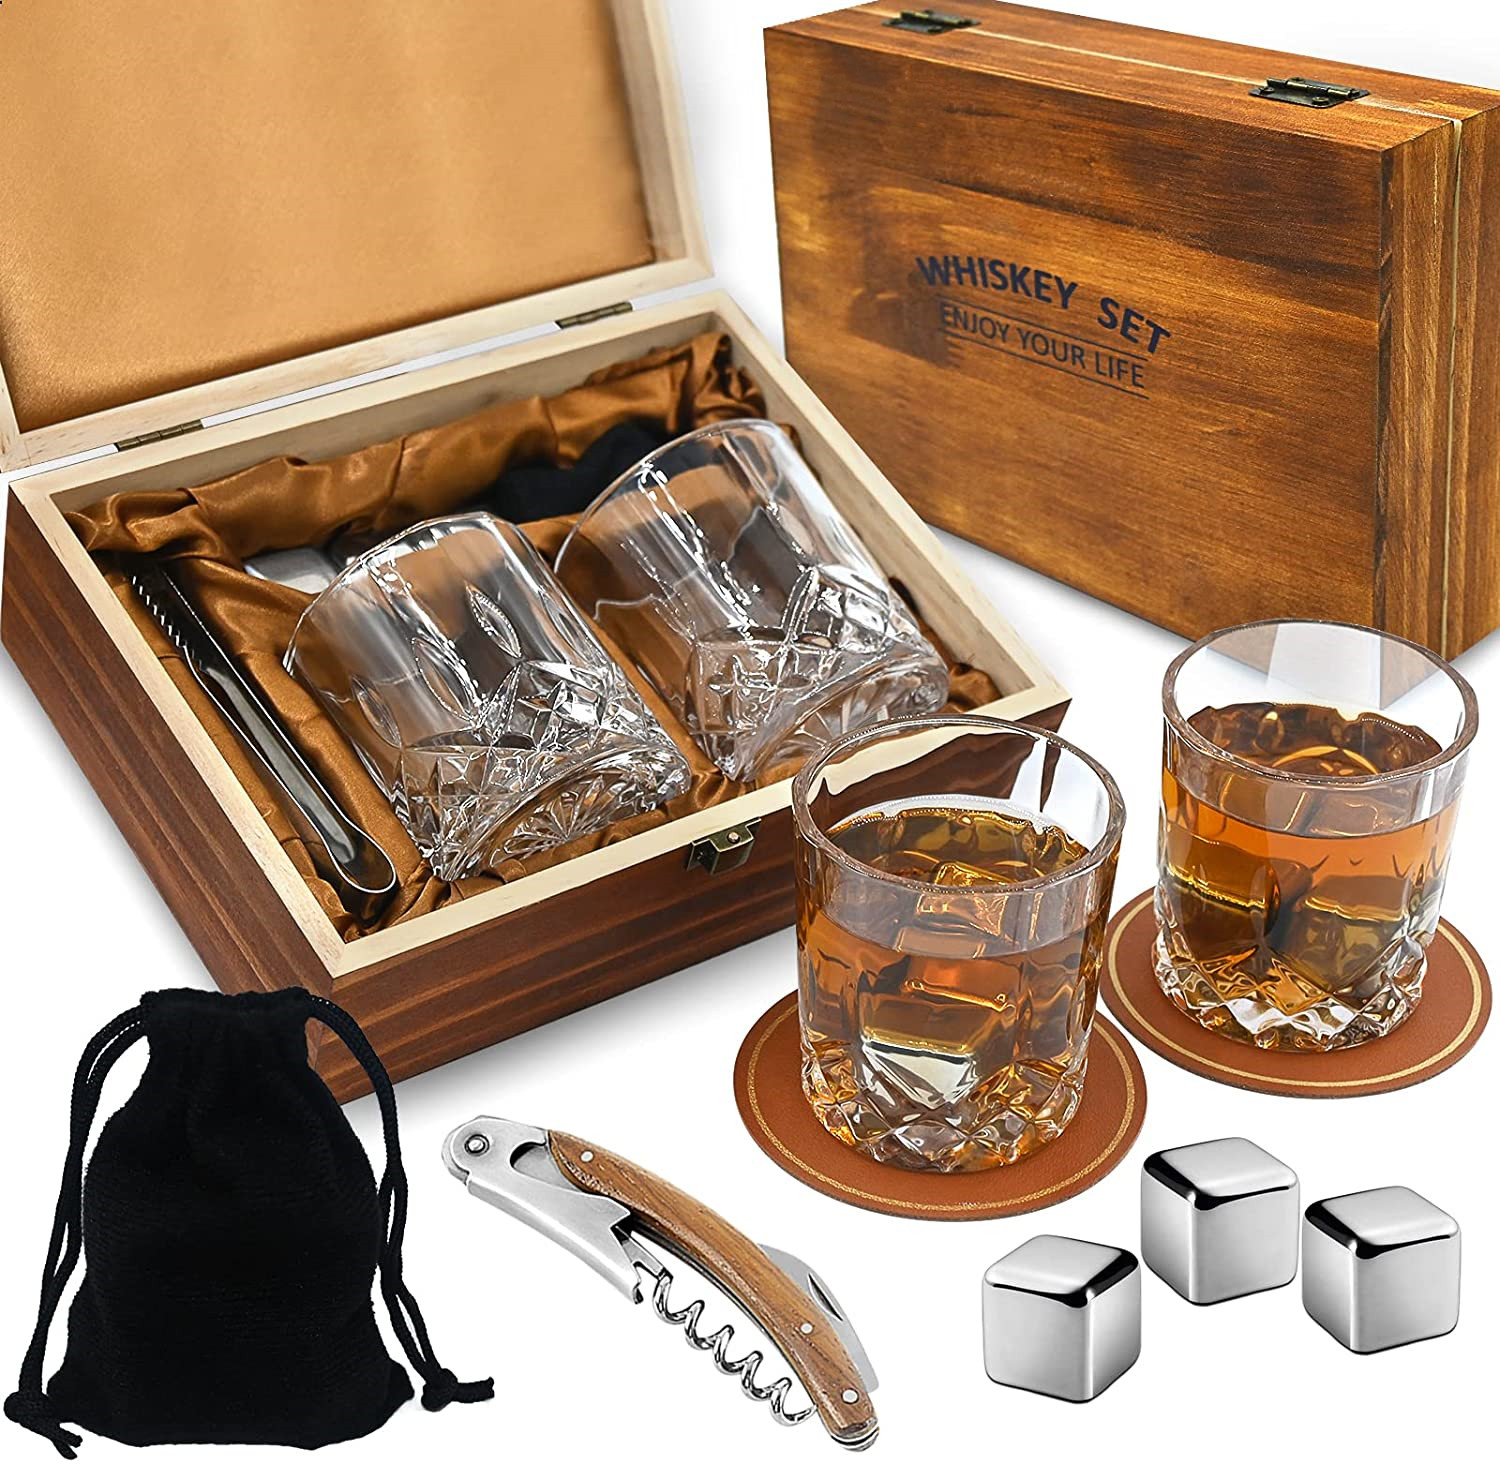 Leading Manufacturer for Mortar -  Bourbon Gifts for Men with 6 Stainless Steel Ice Cubes whisky glass wine opener accessories in wooden box  – Shunstone